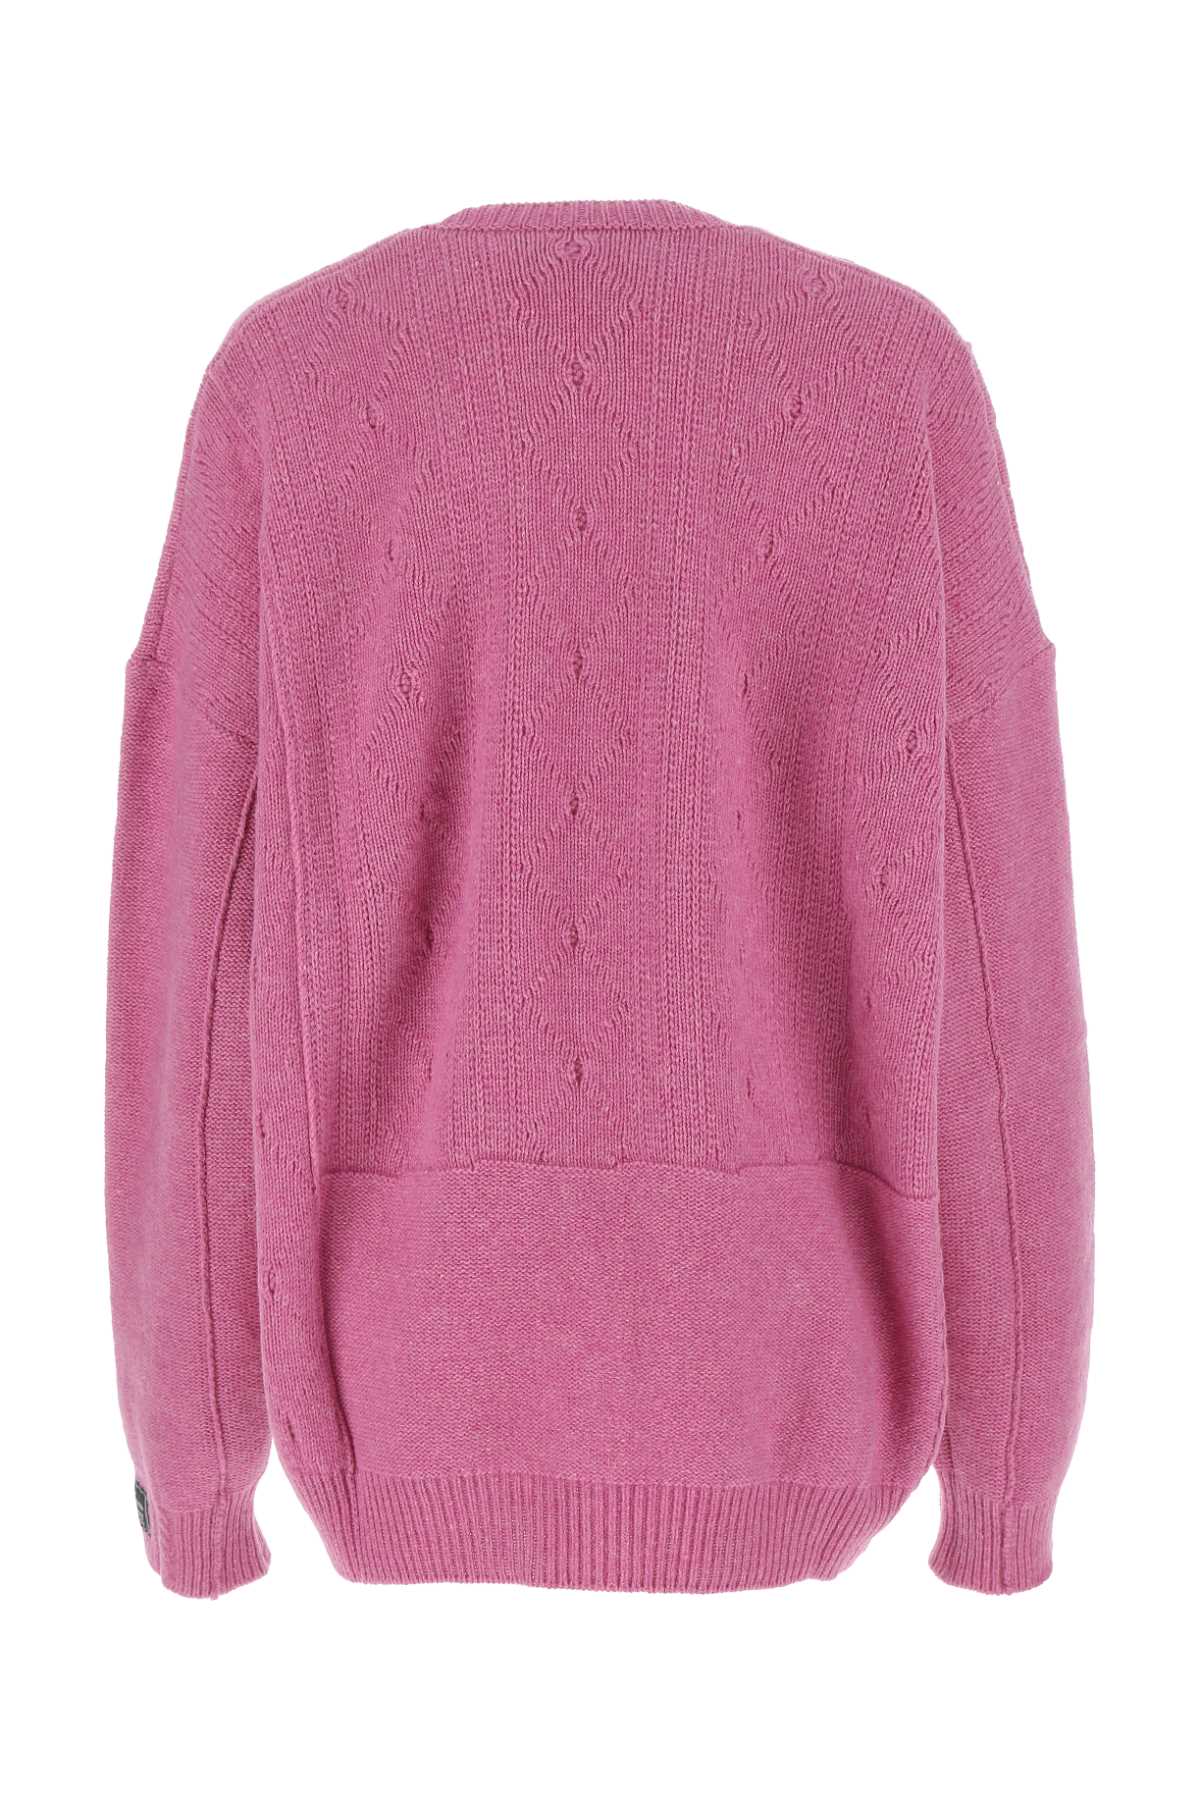 Raf Simons Pink Wool Oversize Jumper In 0059